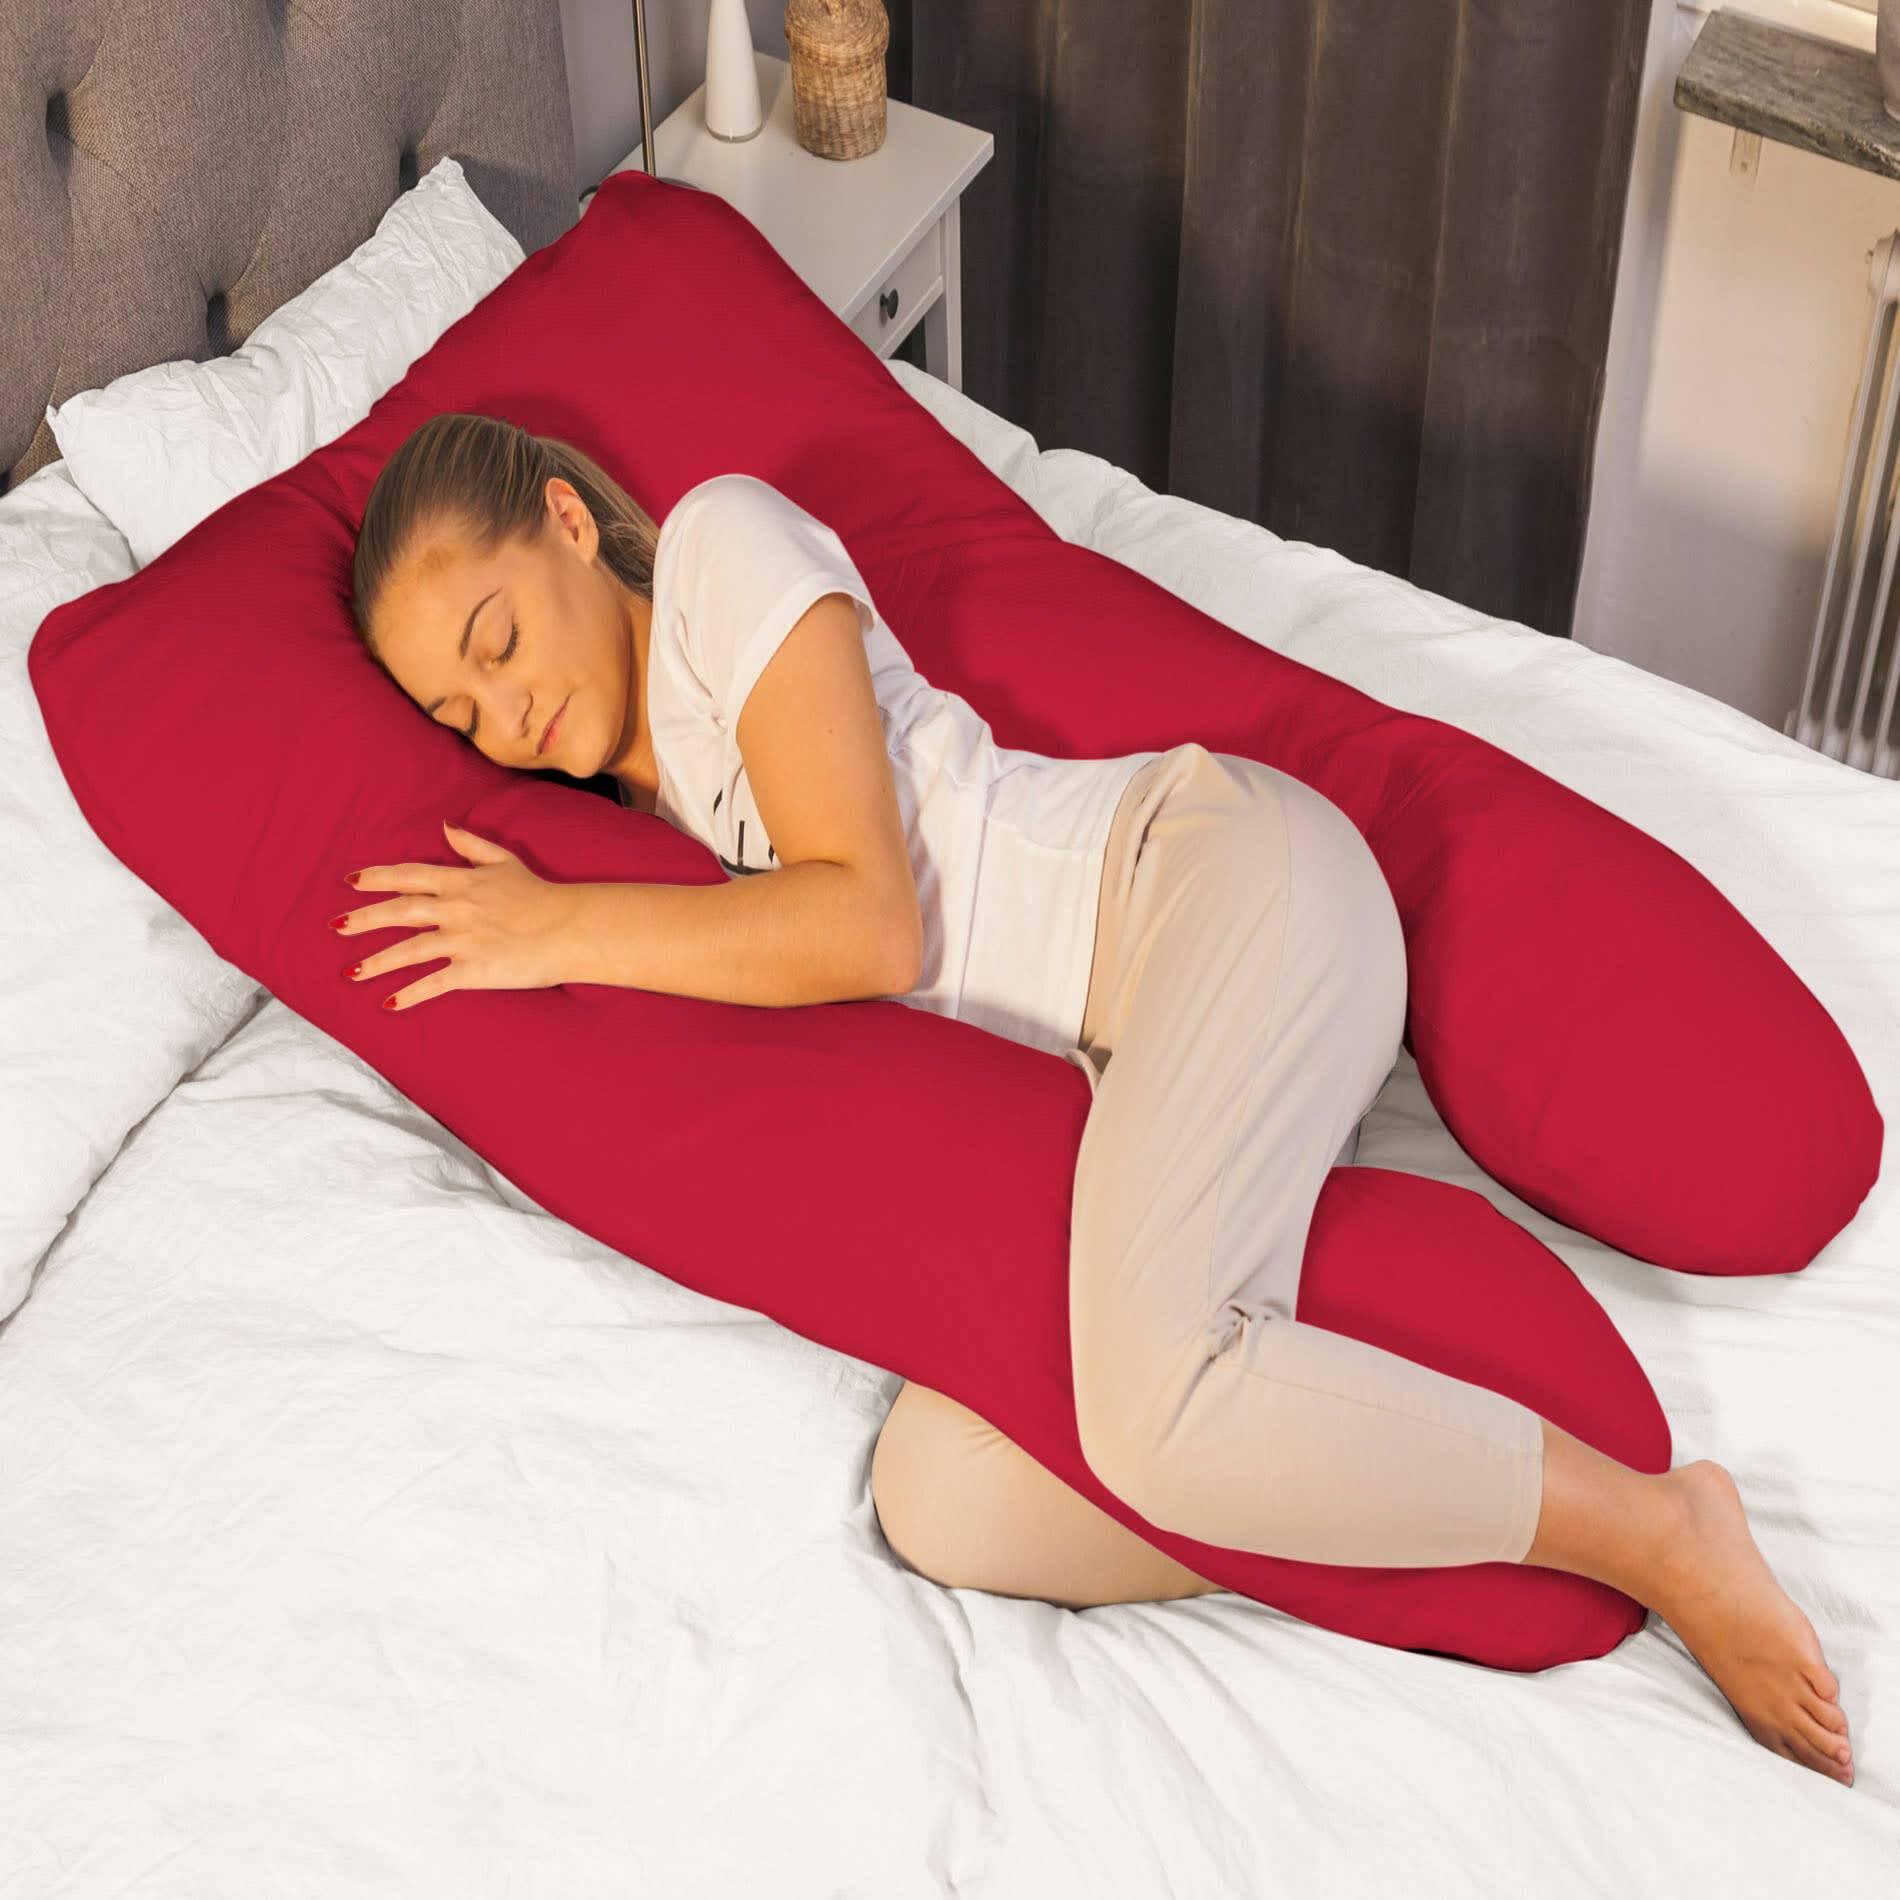 View Pregnancy Body Pillow Maternity Pillows for Sleeping 9FT Red information